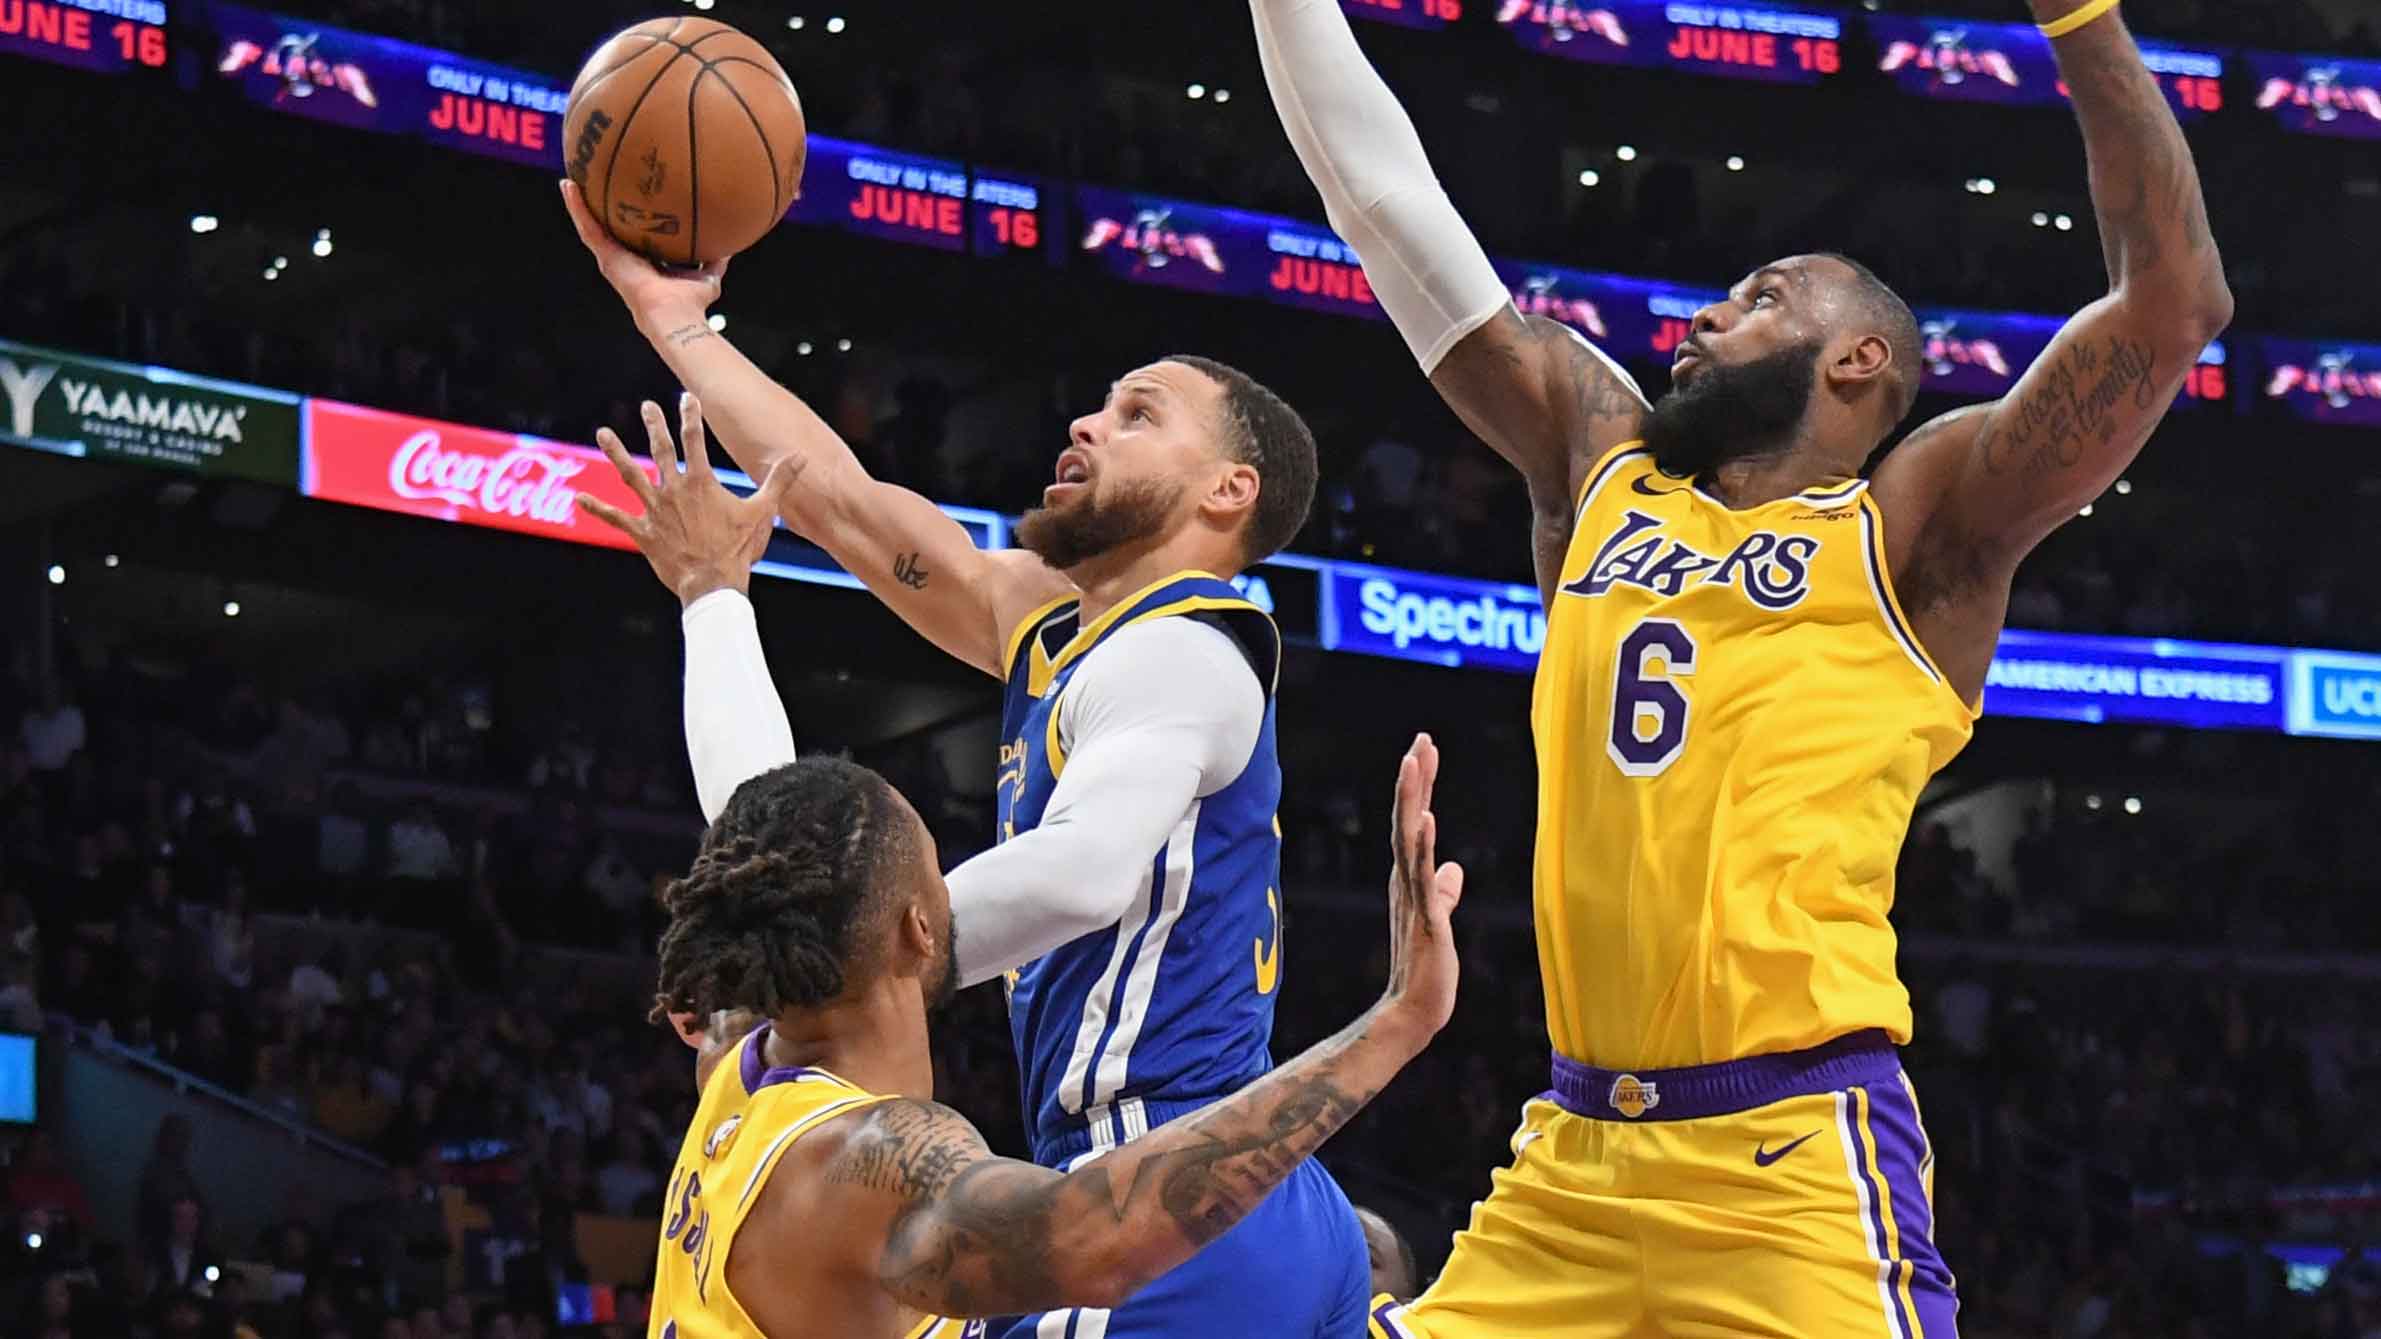 Warriors vs Lakers live stream How to watch NBA playoffs Game 5 online, on TV